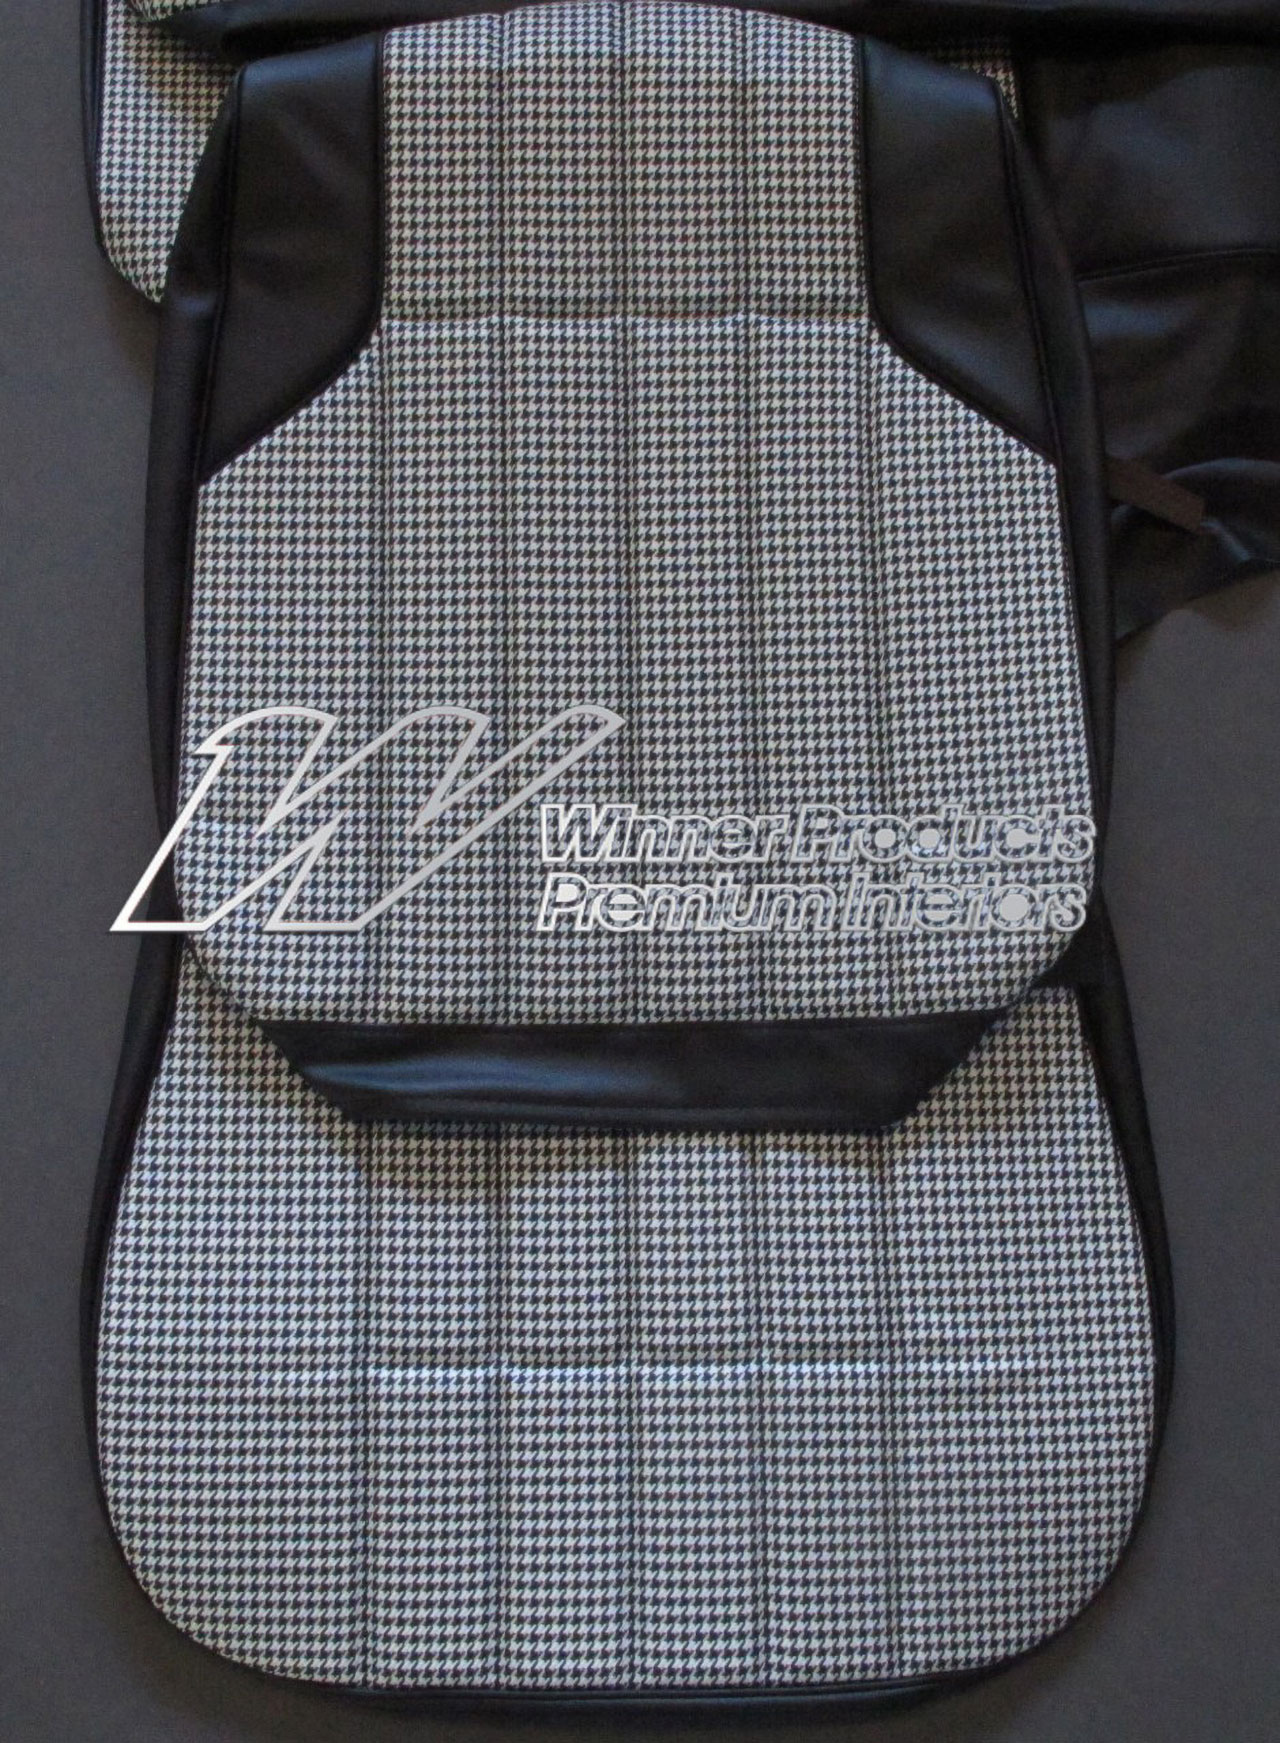 Holden Monaro HT Monaro GTS Coupe 10Y Black & Houndstooth Seat Covers (Image 4 of 6)